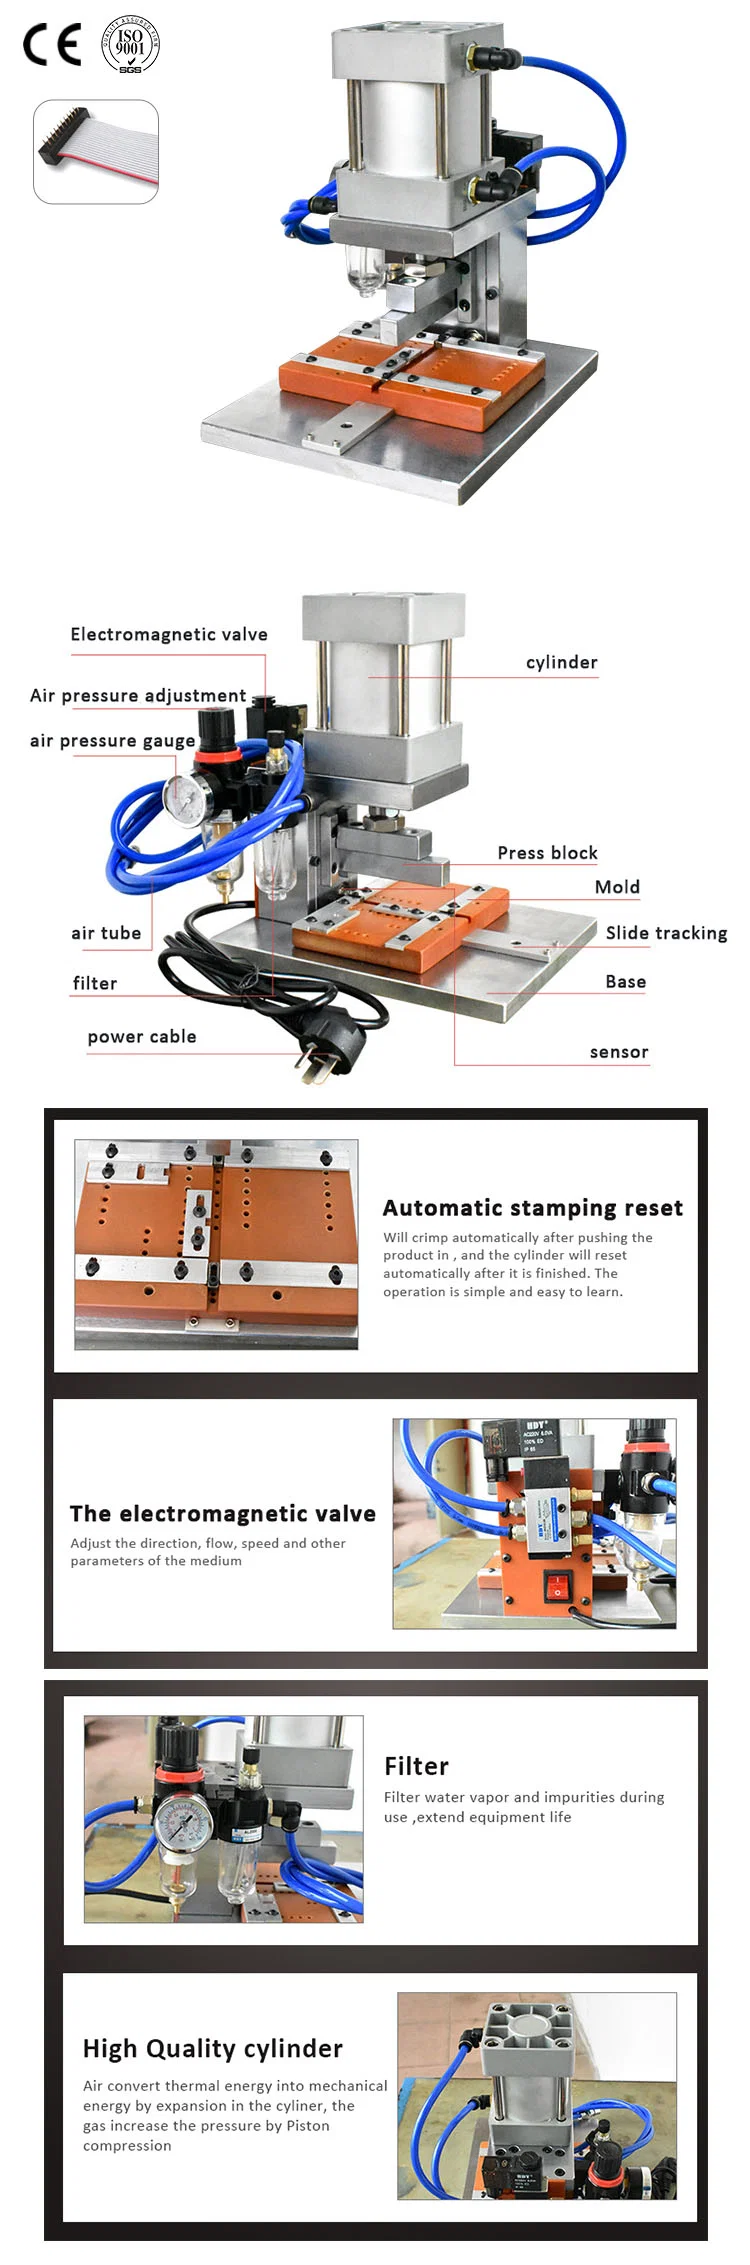 4-64p Idc Flat Ribbon Cable Connector Crimping Machine, Ffc Wire Pneumatic Press Automatic Stamping Machine, Semi-automatic 4-60 Pin Ribbon Cable Fe-male Connector Crimping Machine For Idc Flat Cable Crimp Machine